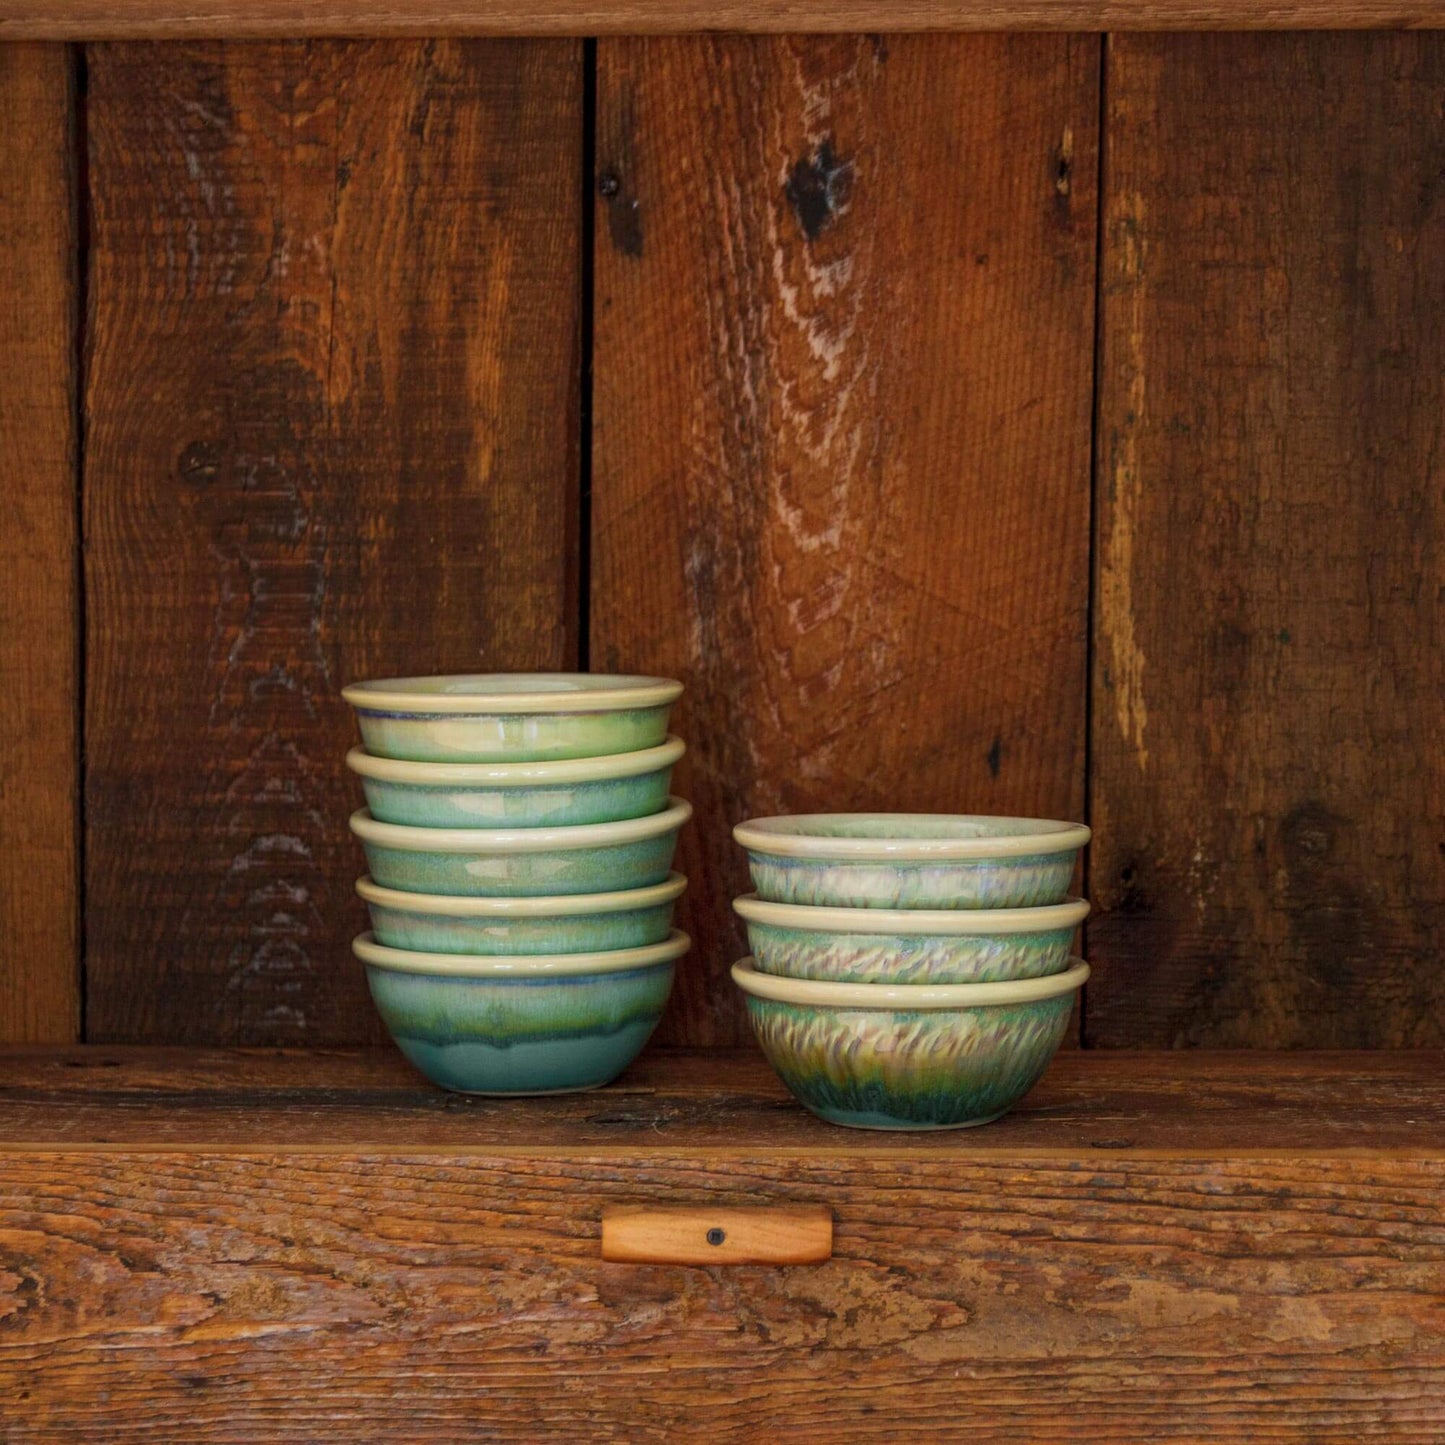 Handmade Pottery Custard Bowl made by Georgetown Pottery in Maine